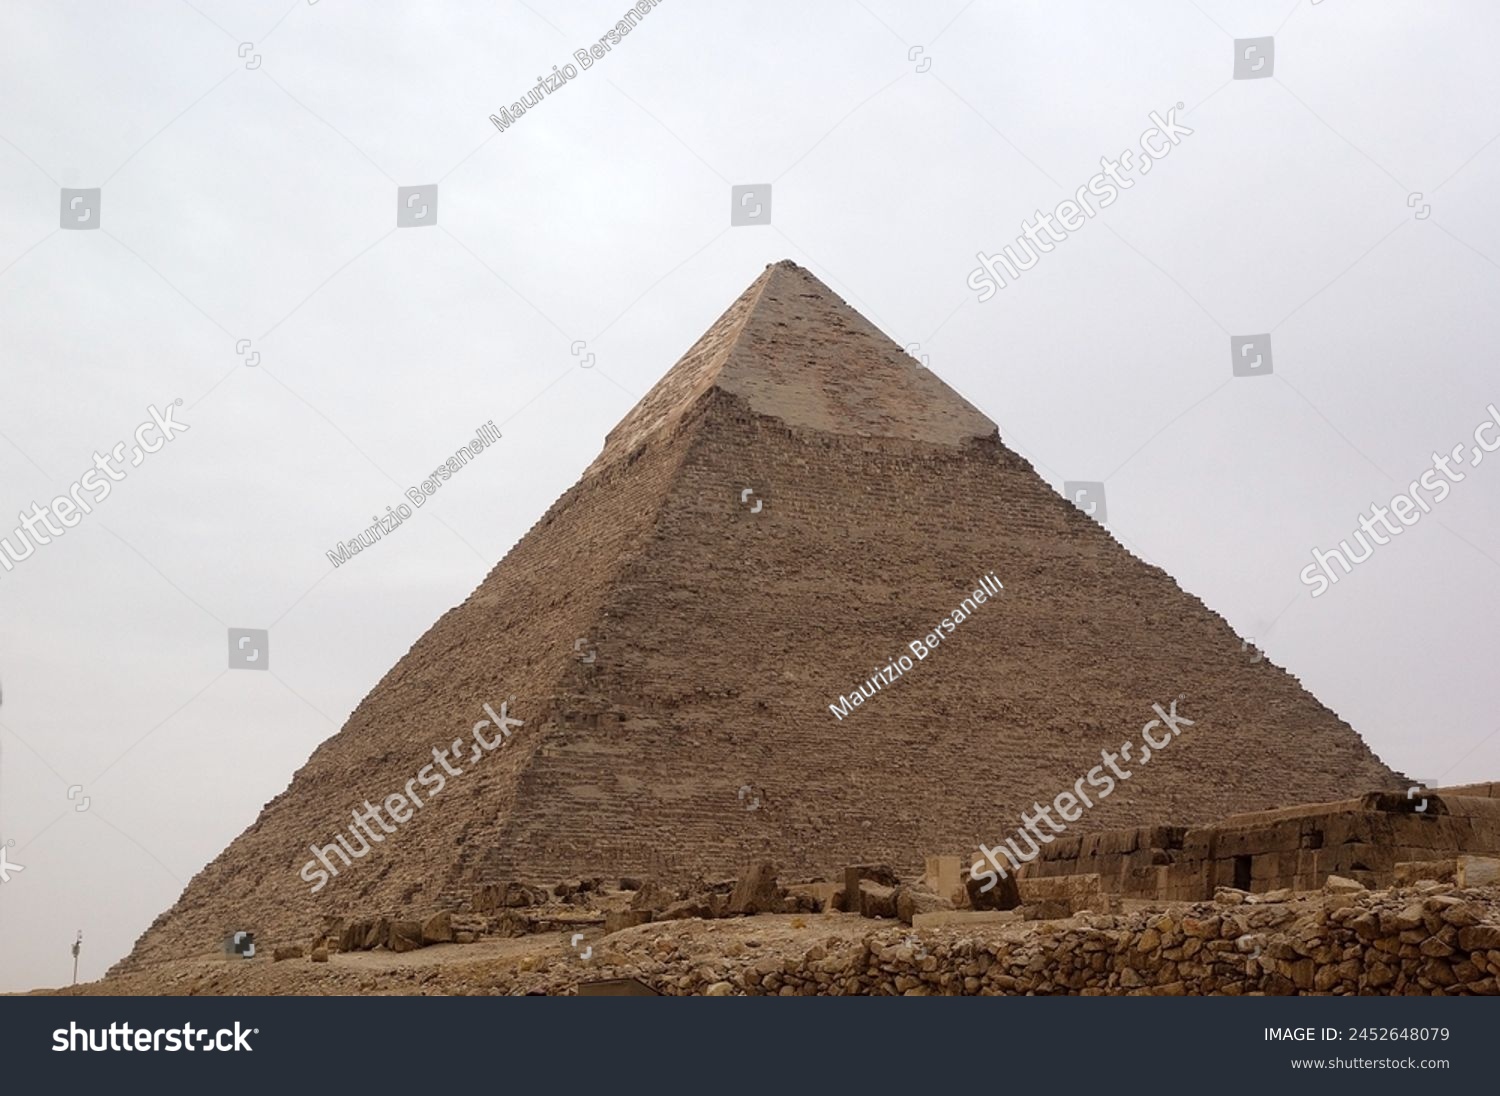 The pyramid of Khafre in Giza pyramid complex, Egypt. It was built during the Fourth Dynasty of the Old Kingdom #2452648079